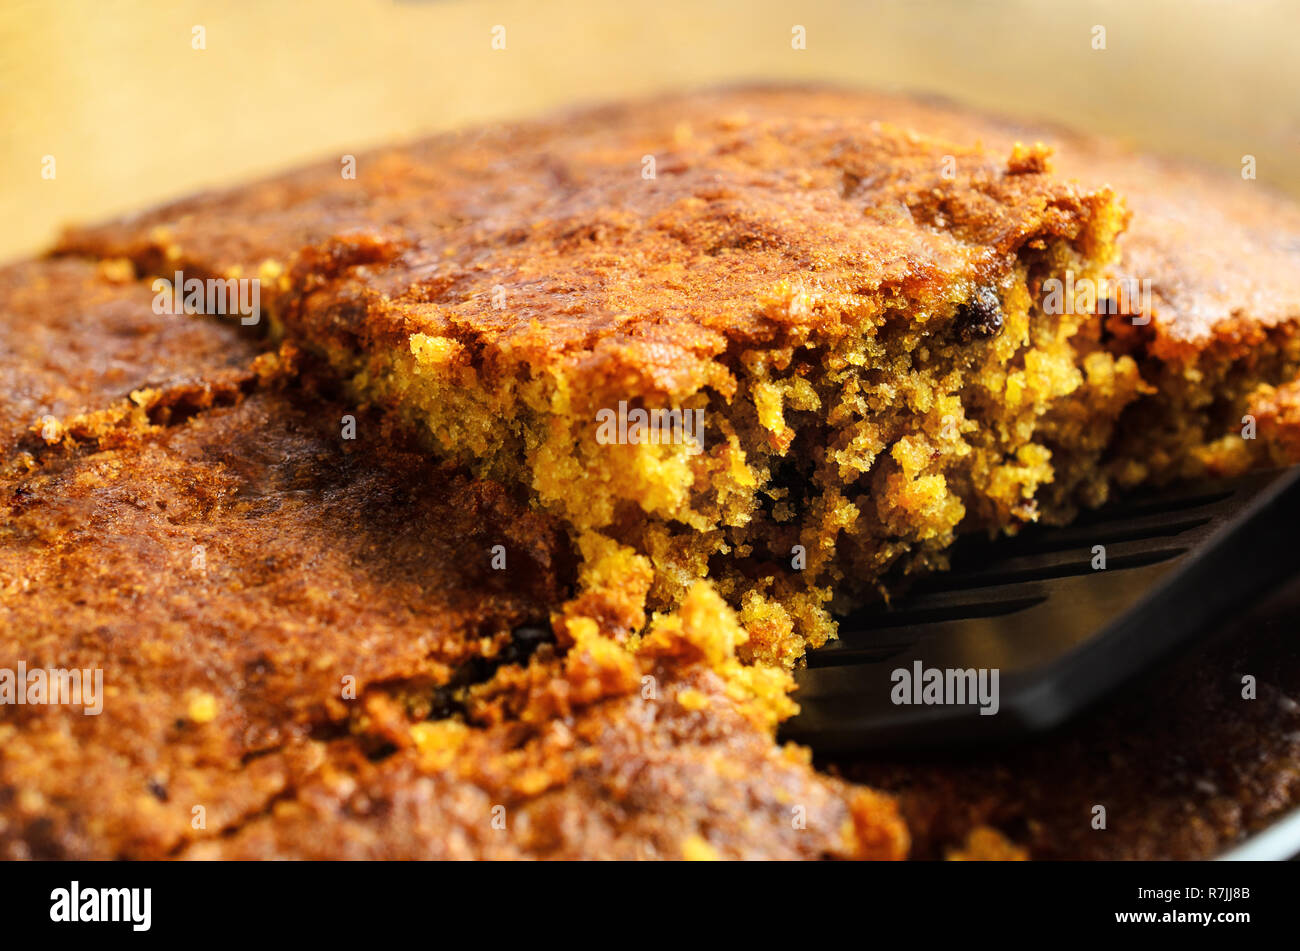 A crumbly square slice of freshly baked carrot cake being lifted from baking dish for serving. Close up just above eye level. Stock Photo